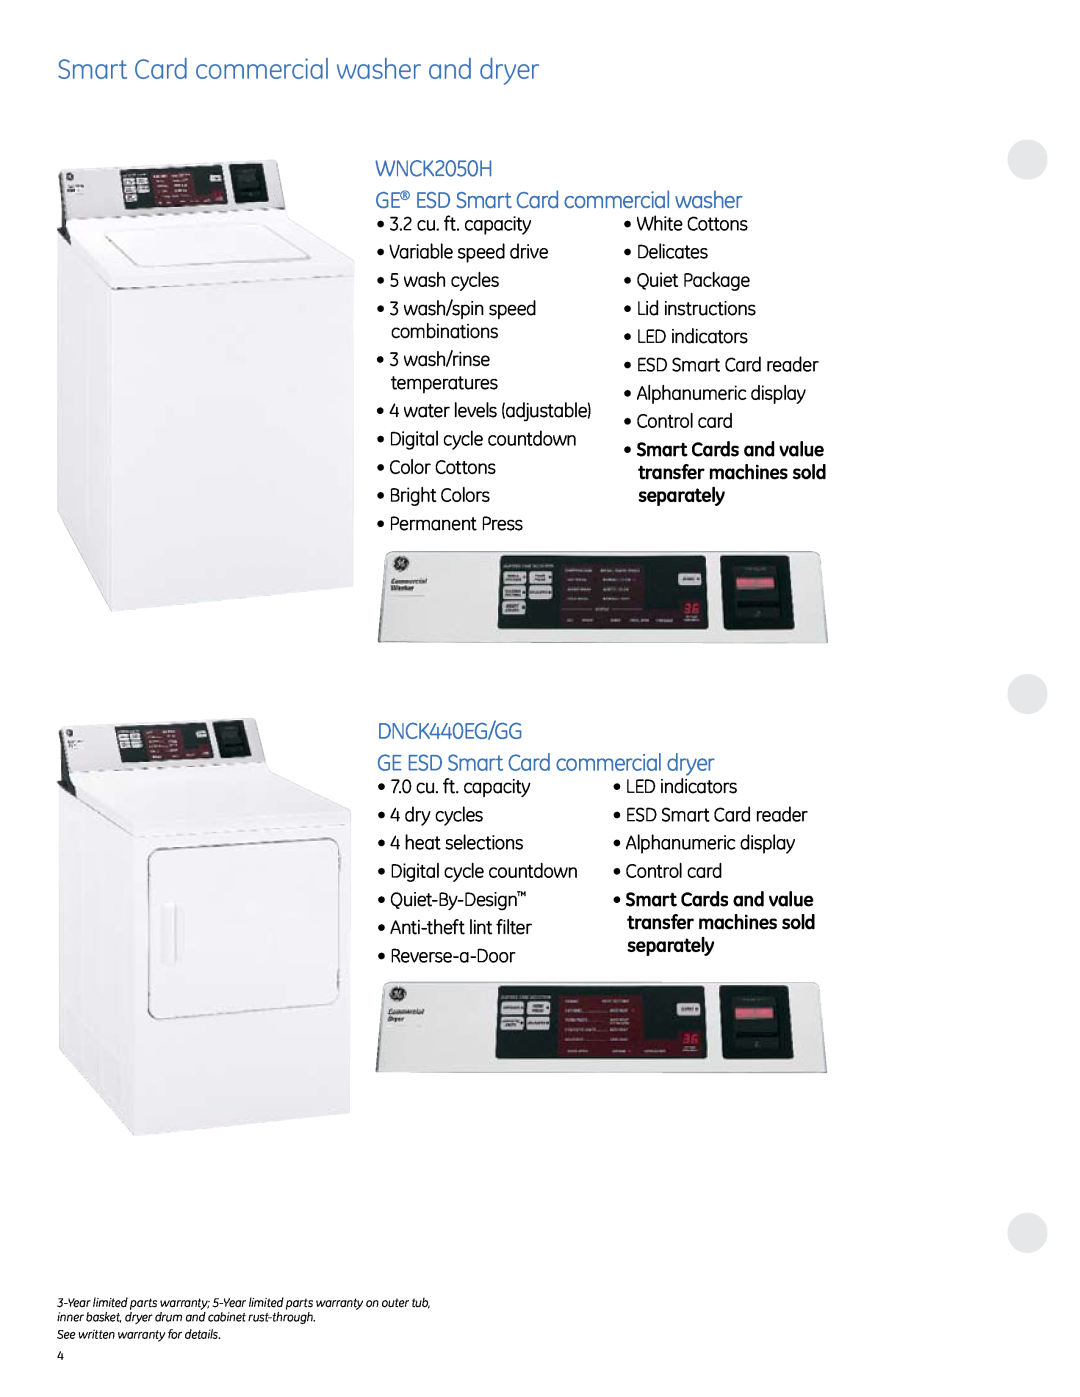 GE specifications Smart Card commercial washer and dryer, wnck2050H GE ESD Smart Card commercial washer 